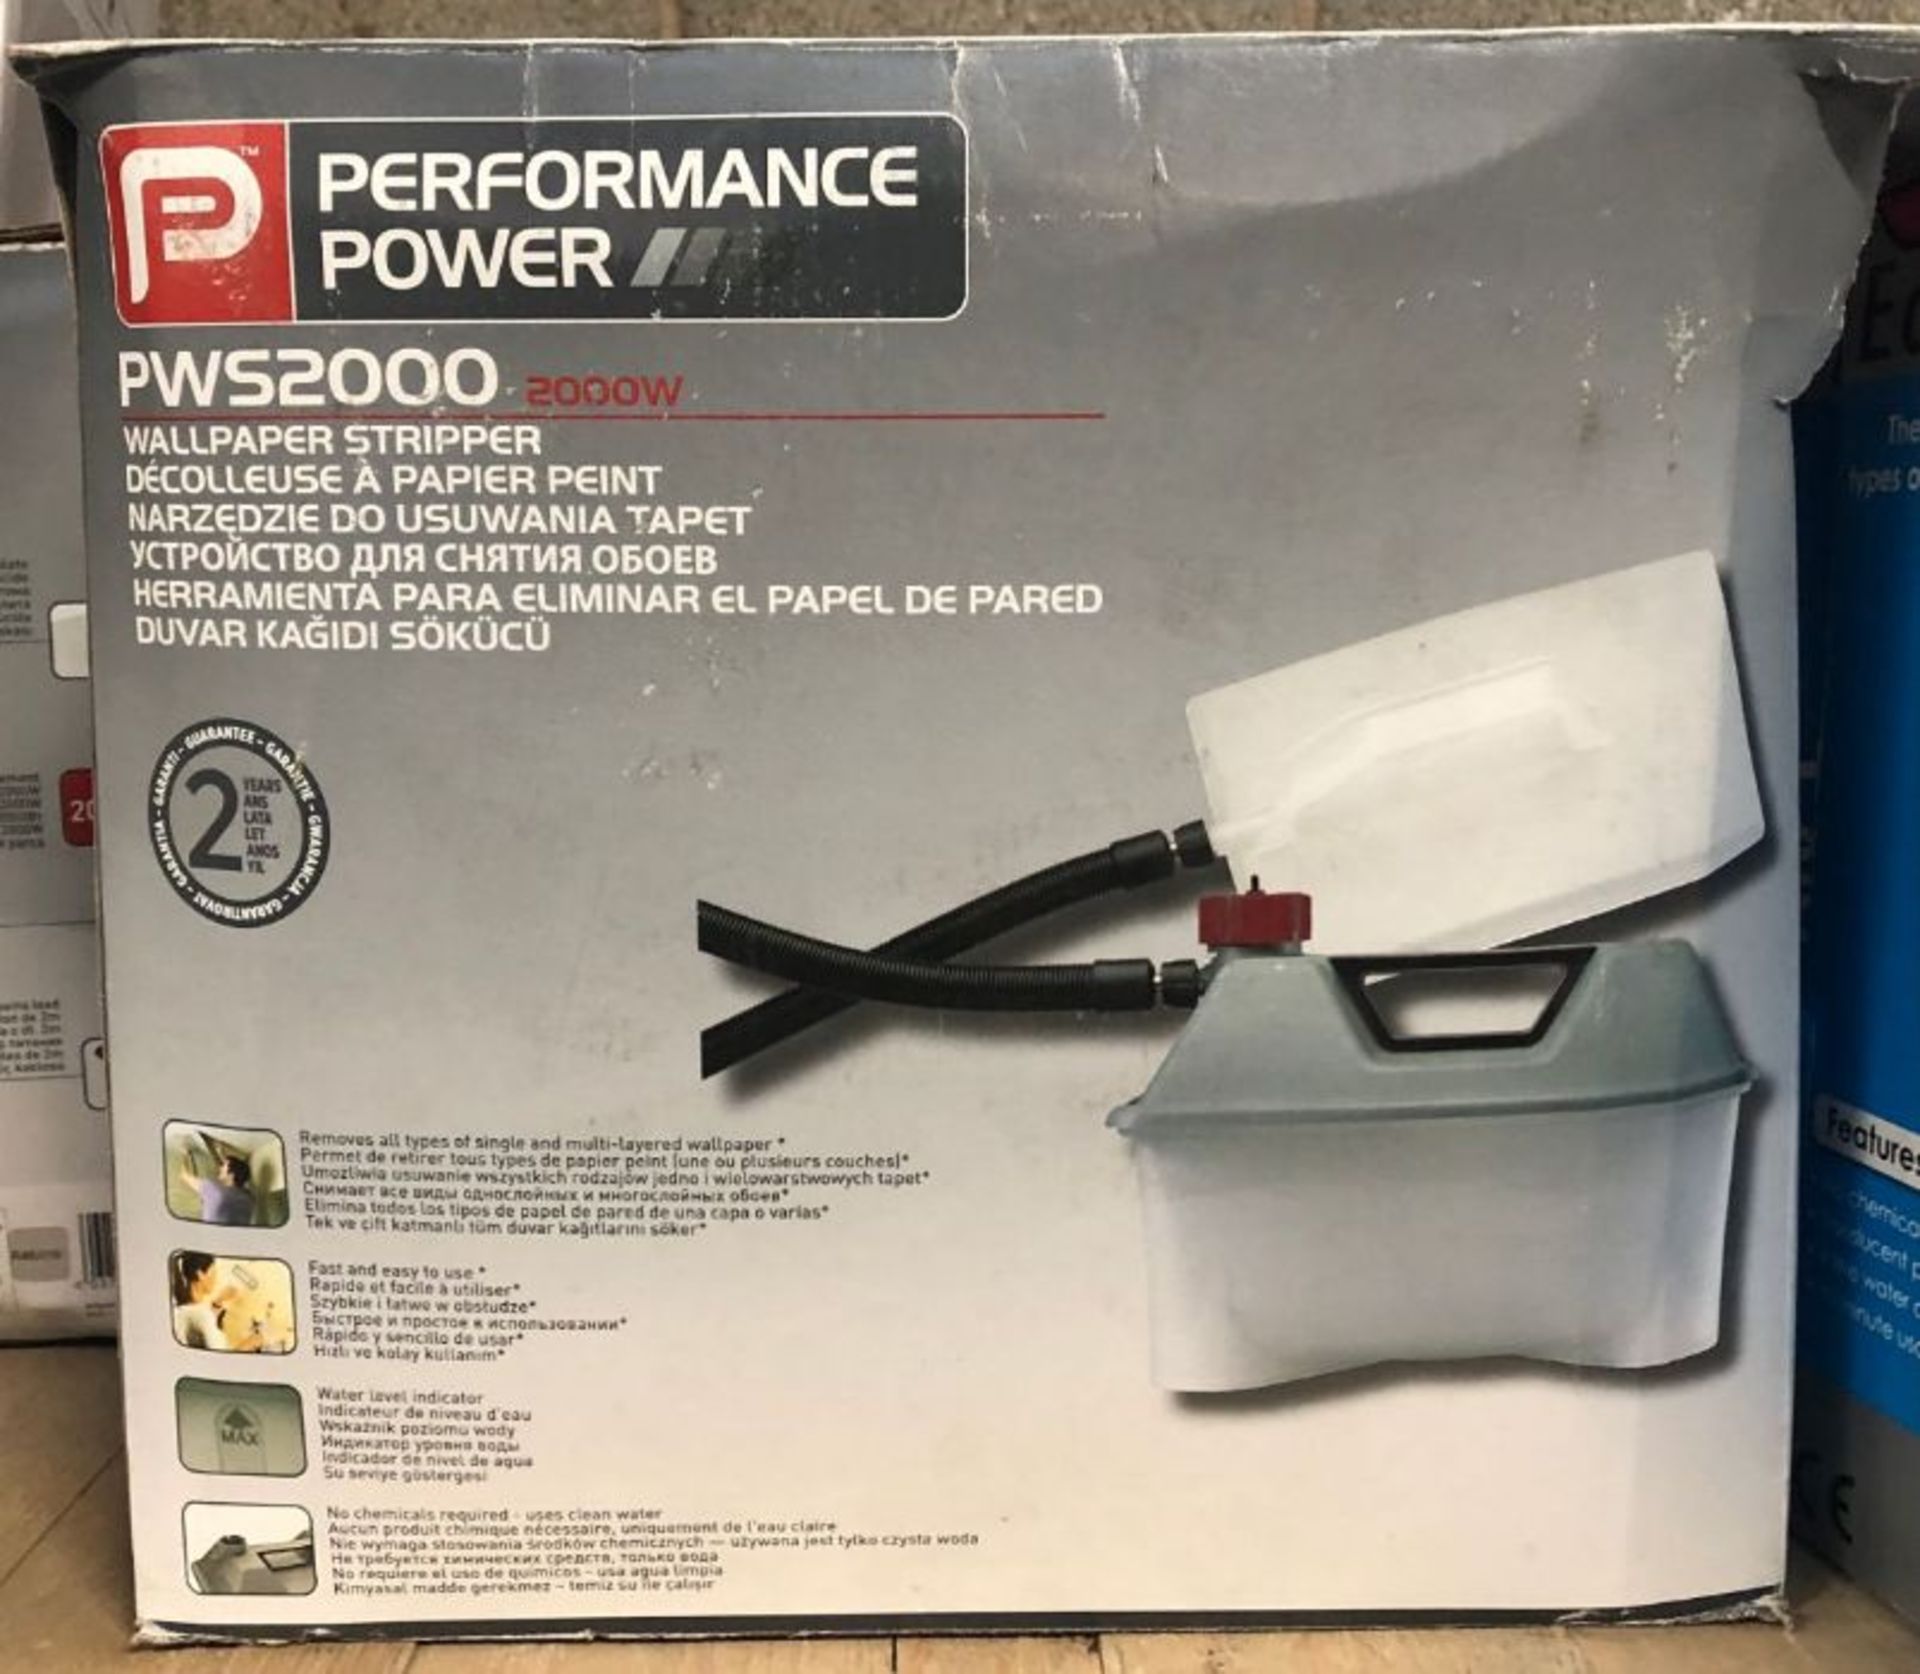 3 X PERFORMANCE POWER 2000W 5L WALLPAPER STRIPPERS PWS2000C/ COMBINED RRP £90.00 / UNTESTED CUSTOMER